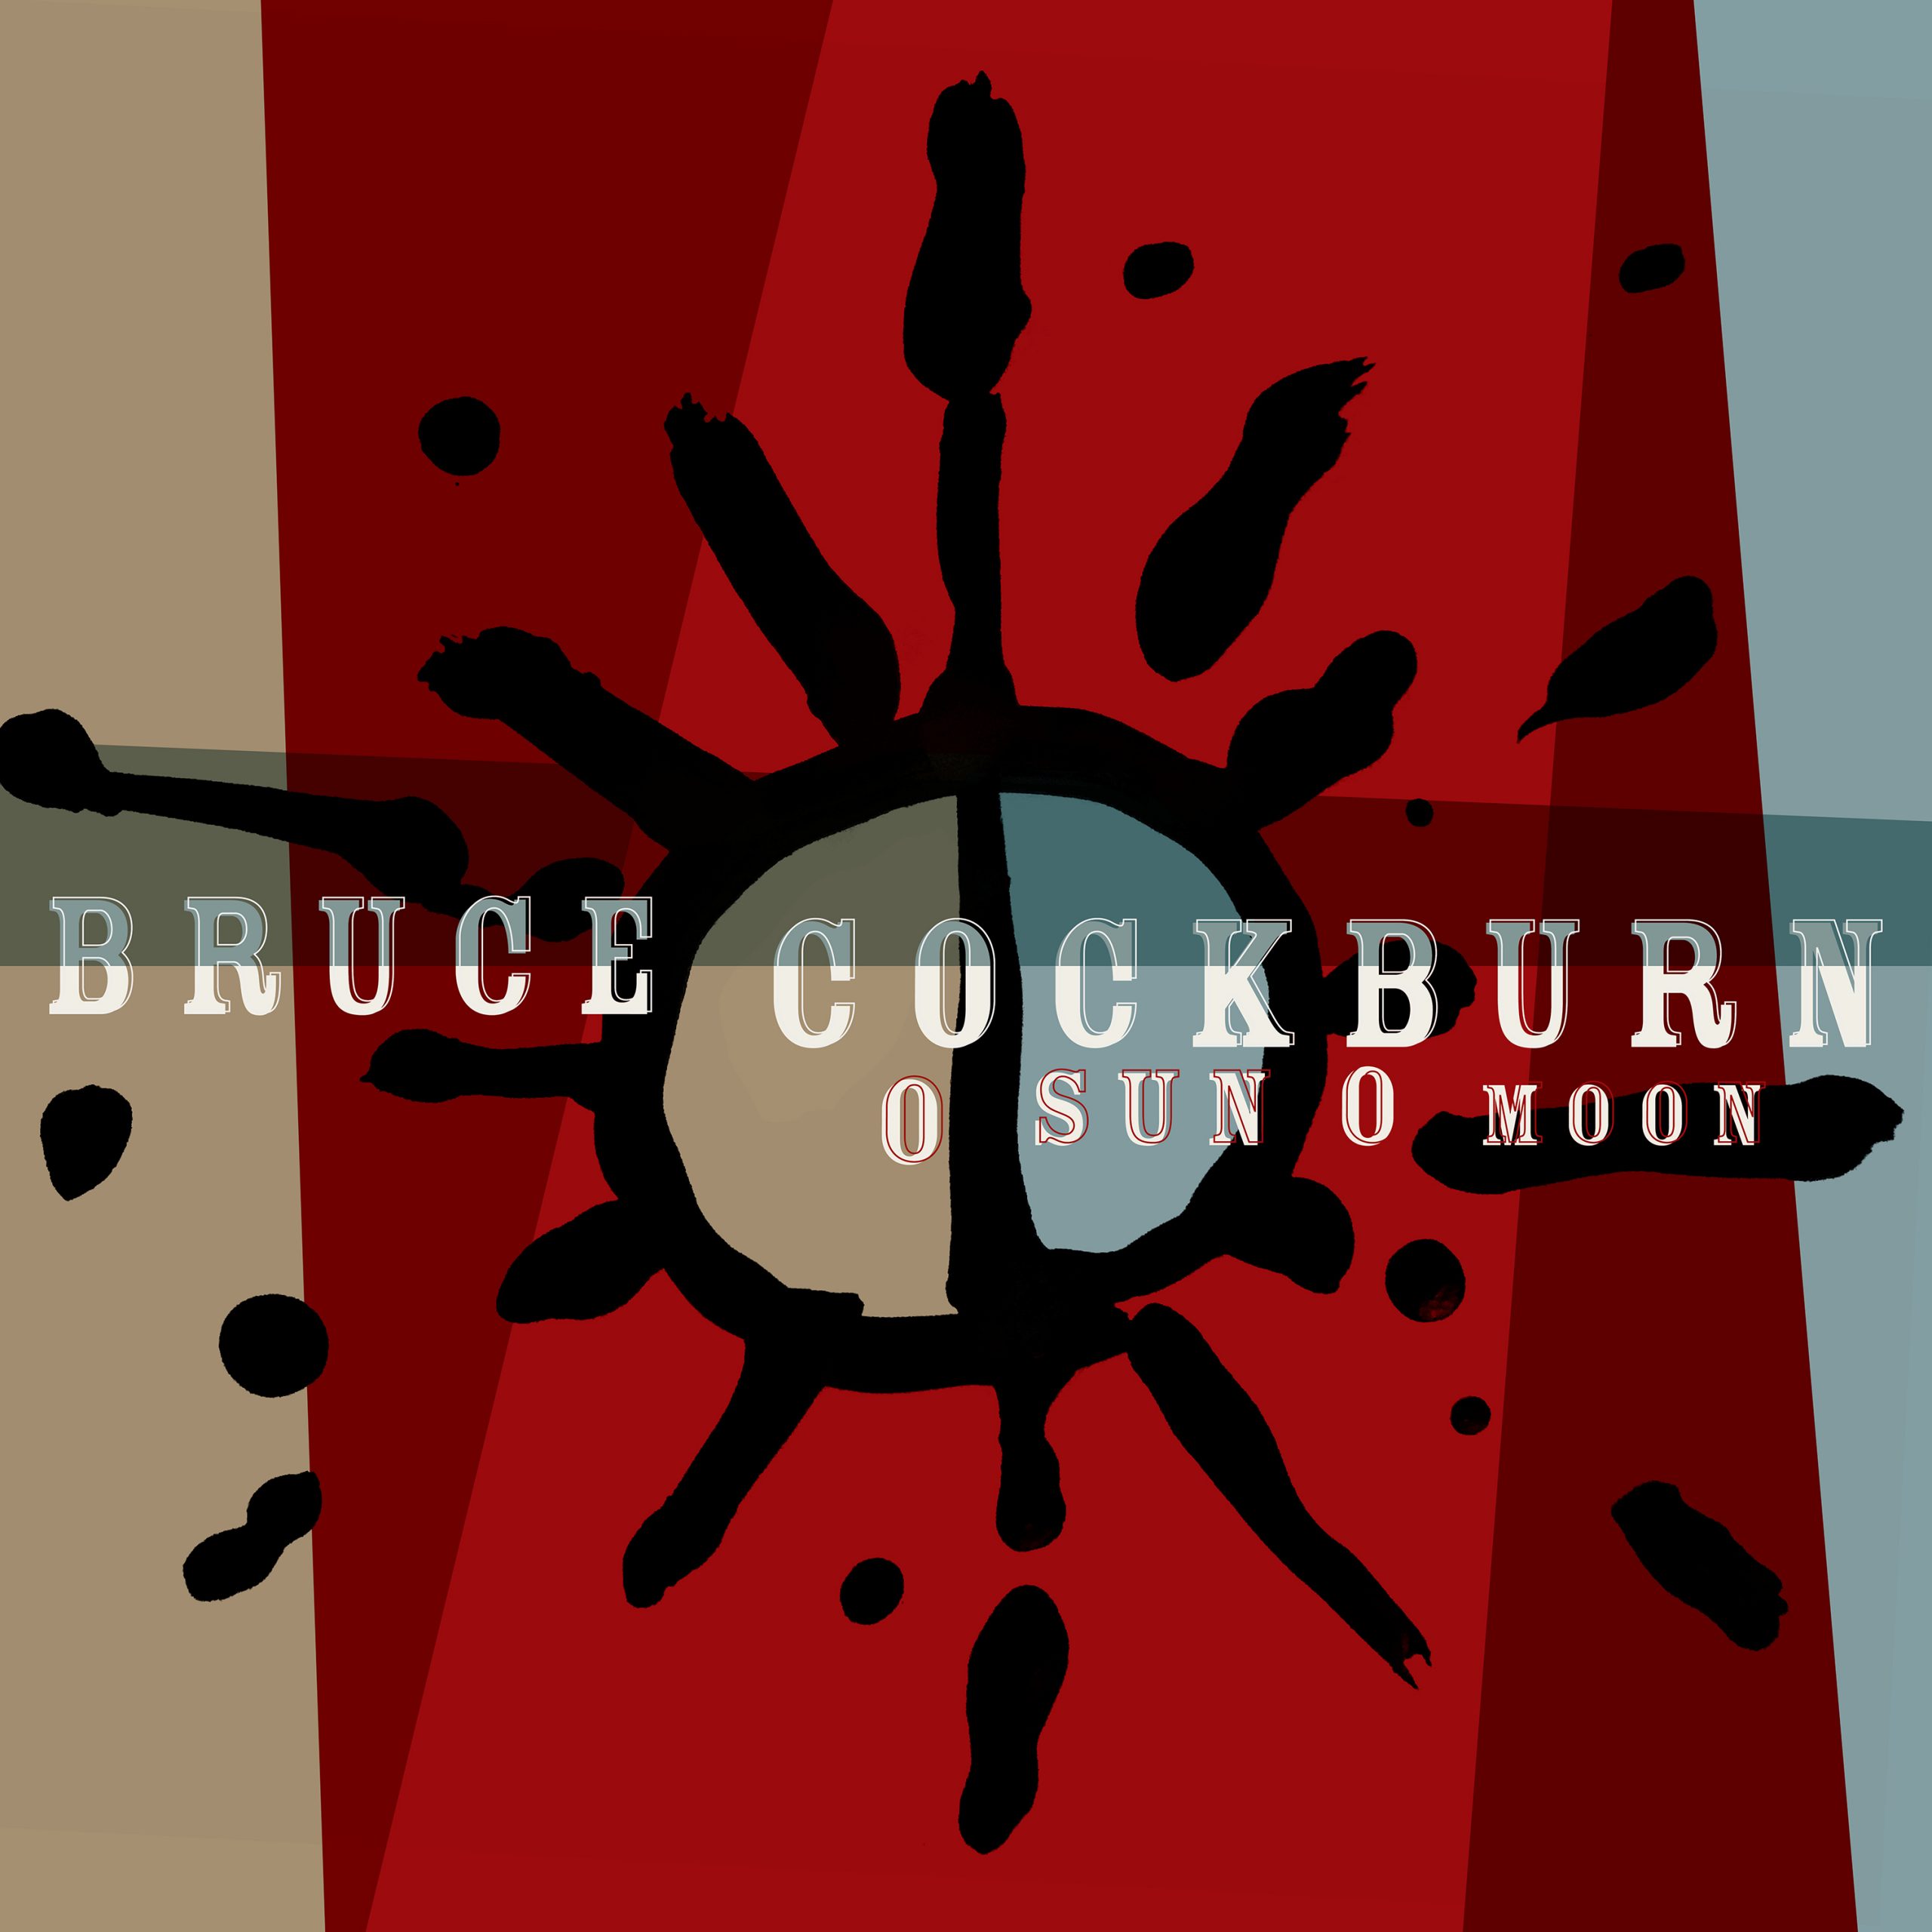 New Bruce Cockburn U.S. Tour Dates to be Announced in Continuing Support of Critically-Acclaimed Latest Album, O Sun O Moon